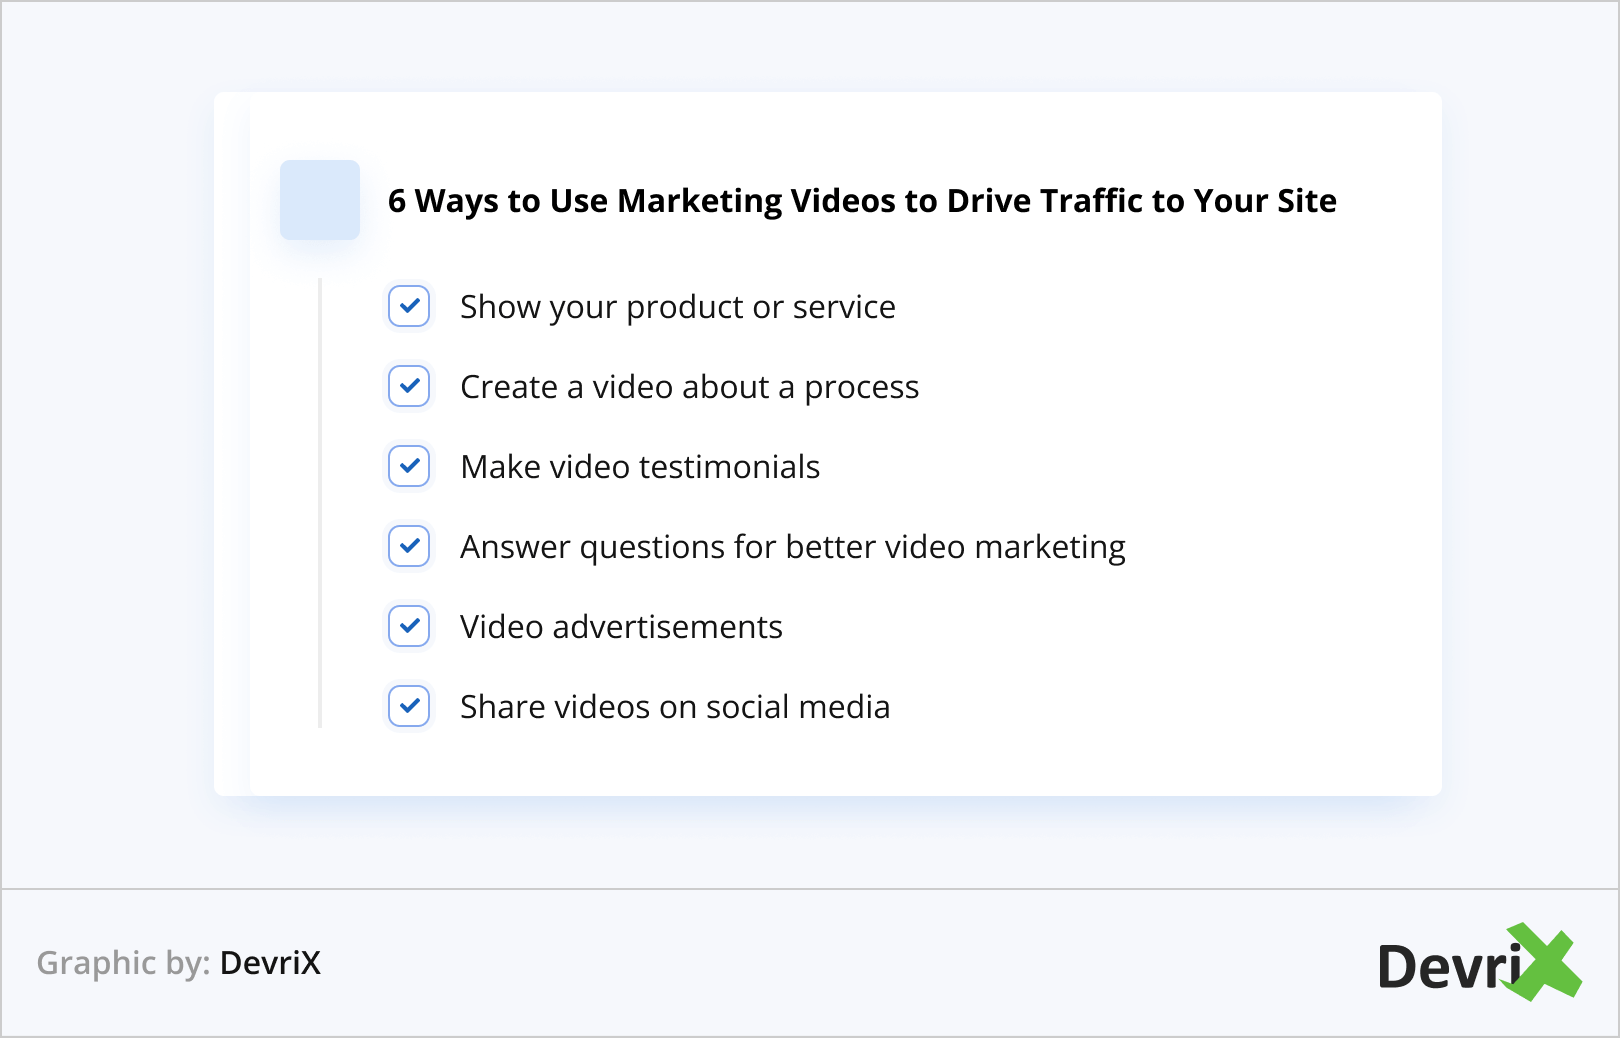 6 Ways to Use Marketing Videos to Drive Traffic to Your Site